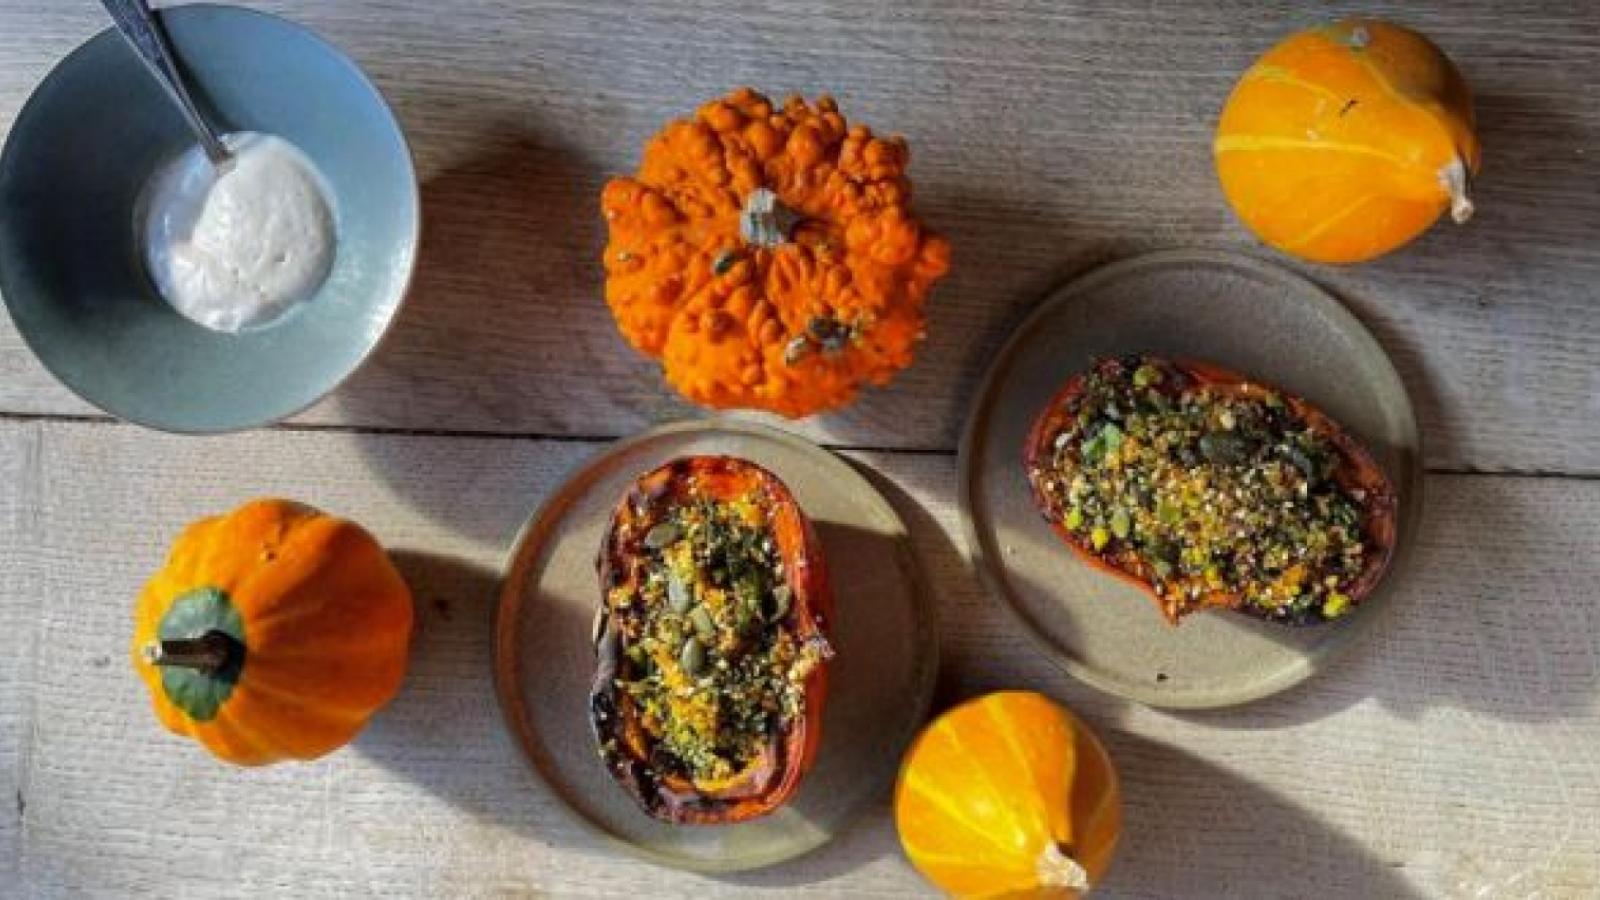 Hannah O’Donnell’s St Tola, quinoa, and pecan stuffed squash